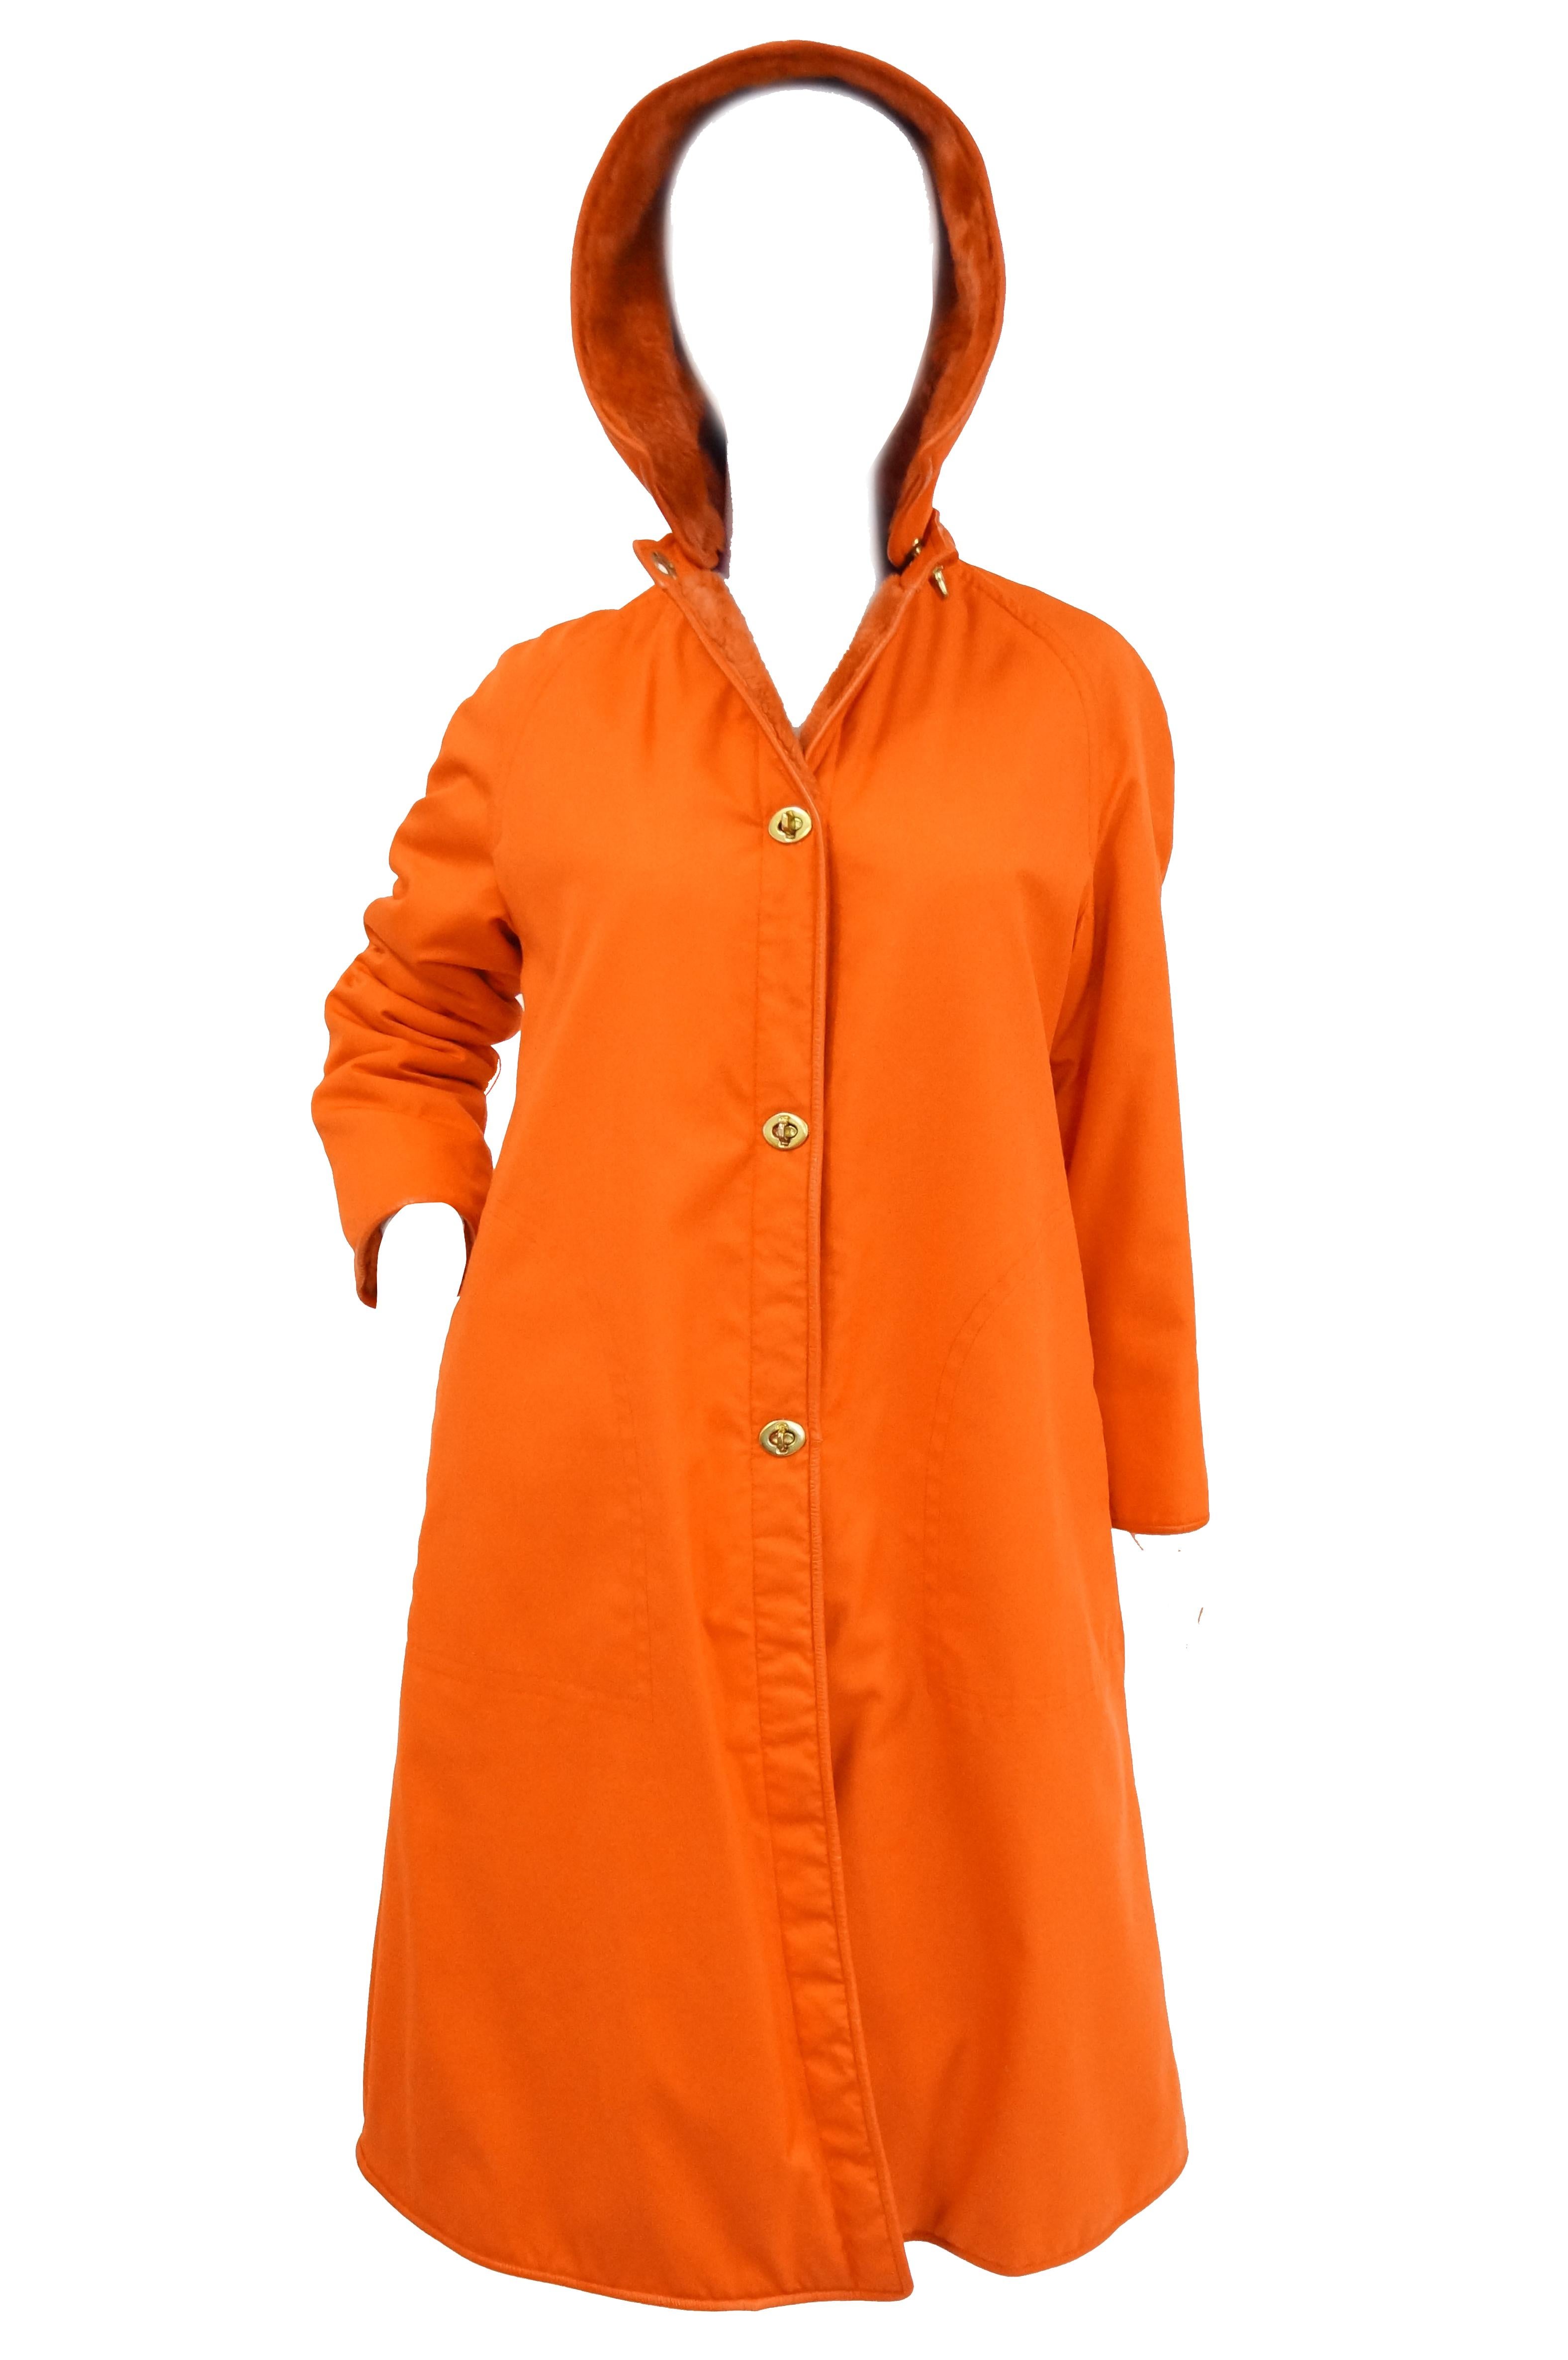 Amazing bright orange Bonnie Cashin canvas and leather coat and skirt ensemble! The skirt is a classic A - line that falls around the knees, with a narrow waist band and light pleating. The jacket is knee - length, with a loose silhouette, rounded